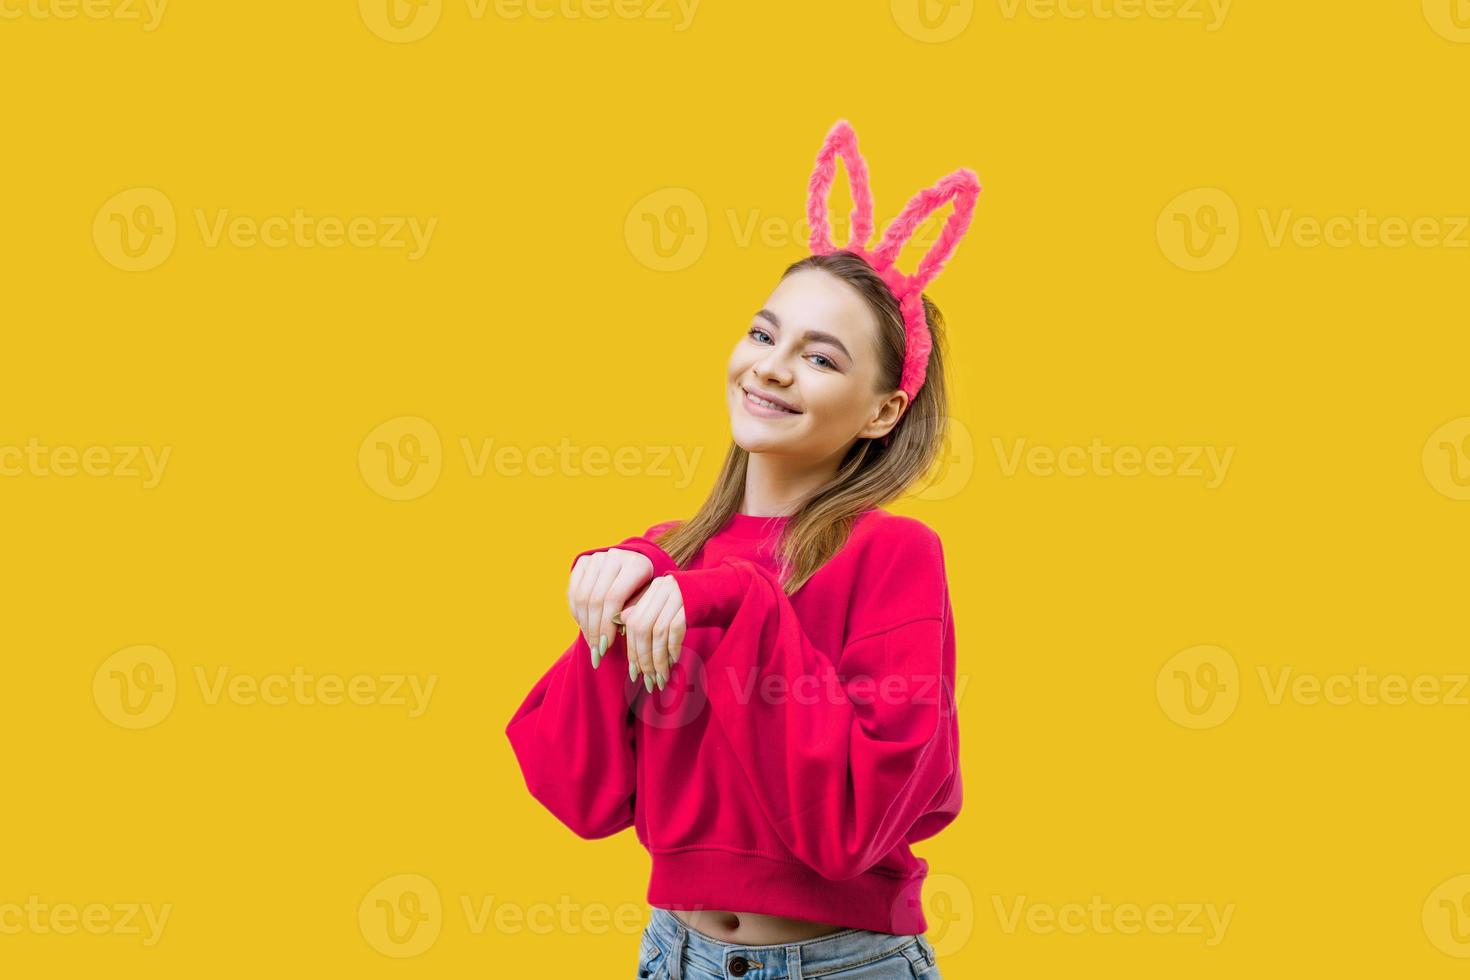 young woman in bunny ears on a yellow background photo